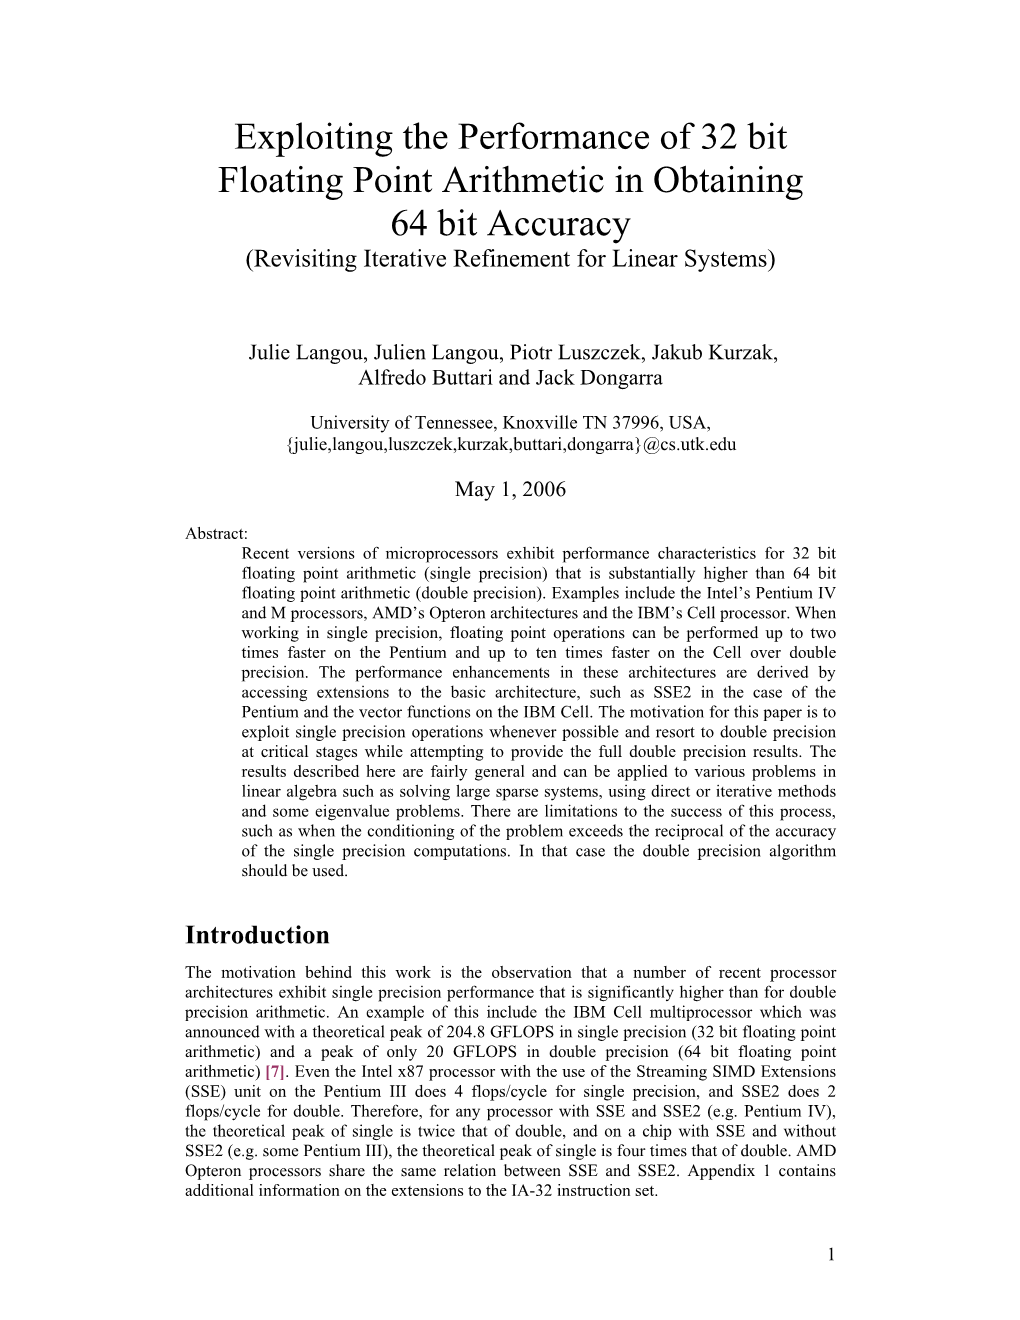 Exploiting the Performance of 32 Bit Floating Point Arithmetic in Obtaining 64 Bit Accuracy (Revisiting Iterative Refinement for Linear Systems)